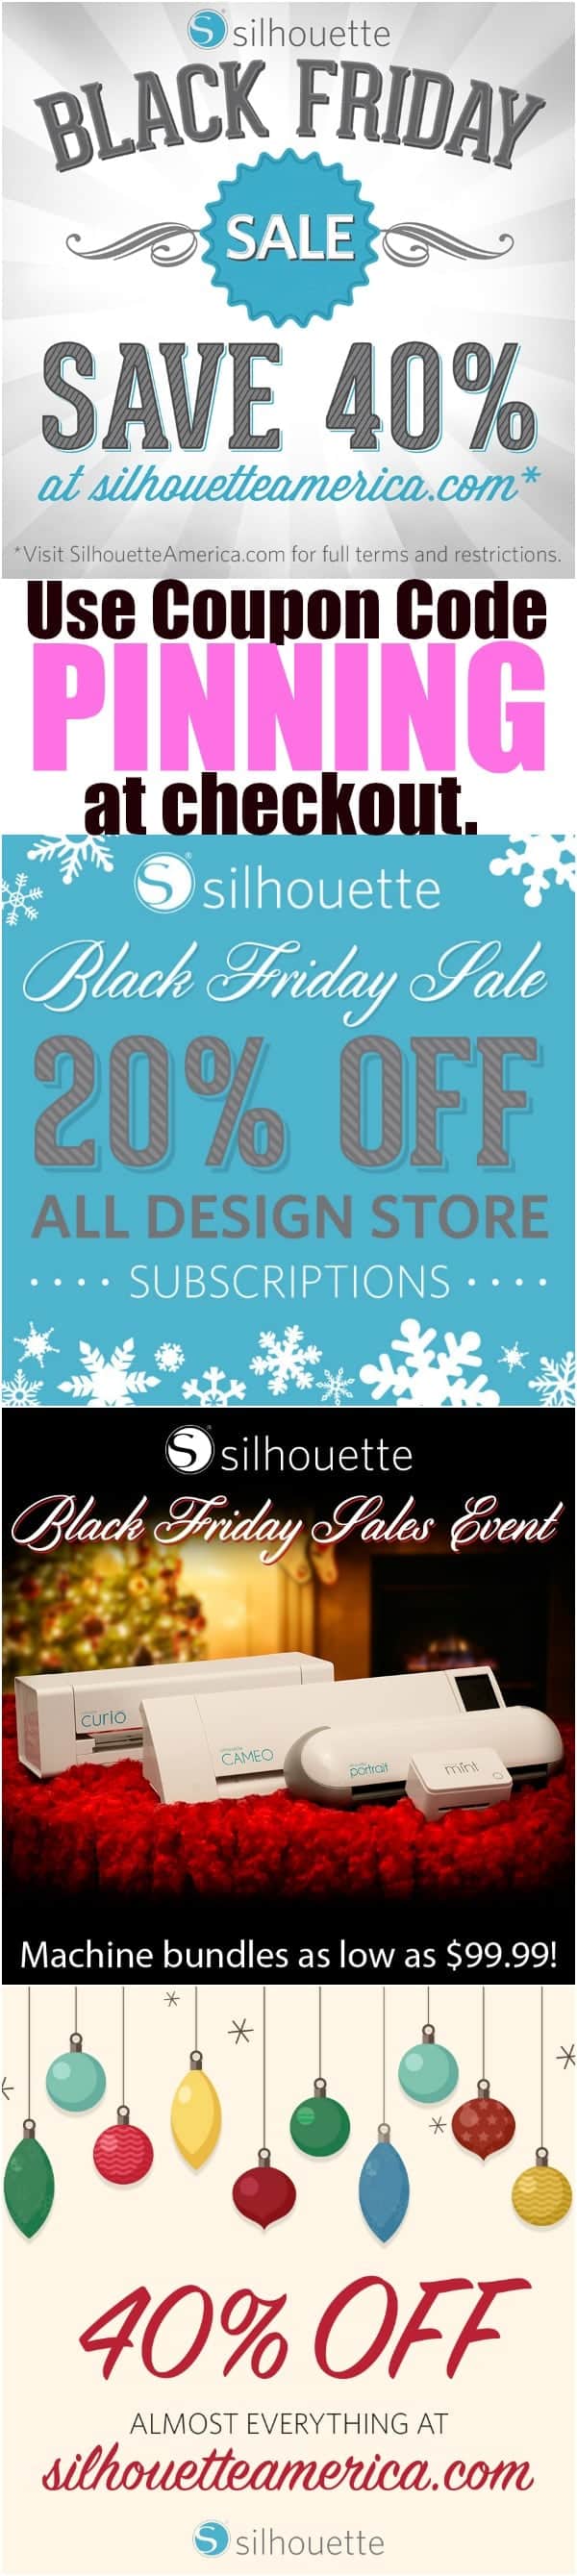 Get the BIGGEST discounts of the year! Silhouette Black Friday Sale 2015-- Use Silhouette Coupon code PINNING at check out. Great details on what you would want to buy!